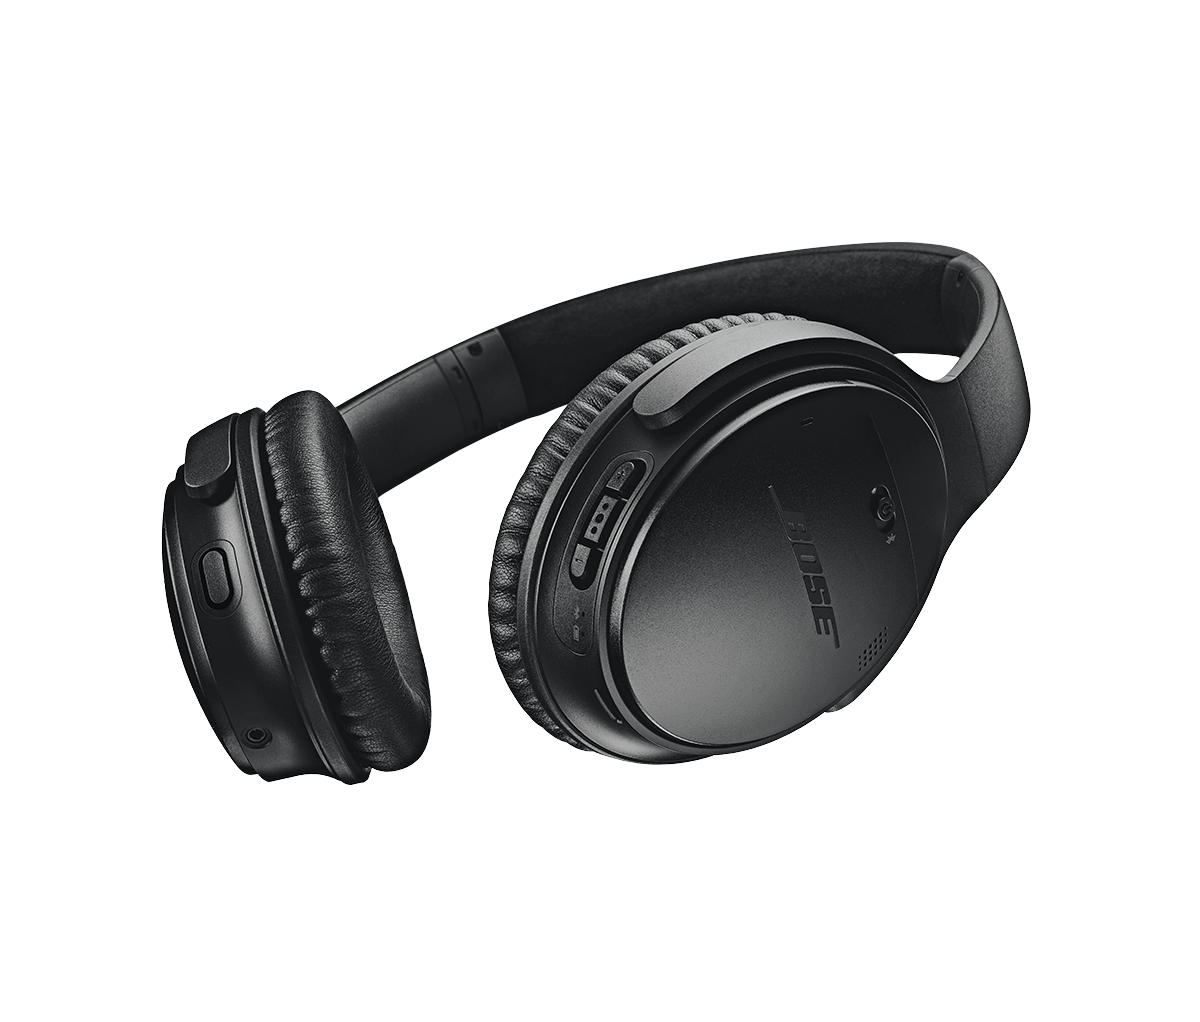 Bose QuietComfort 35 Noise Cancelling Bluetooth Over-Ear Wireless Headphones, Black - image 3 of 8